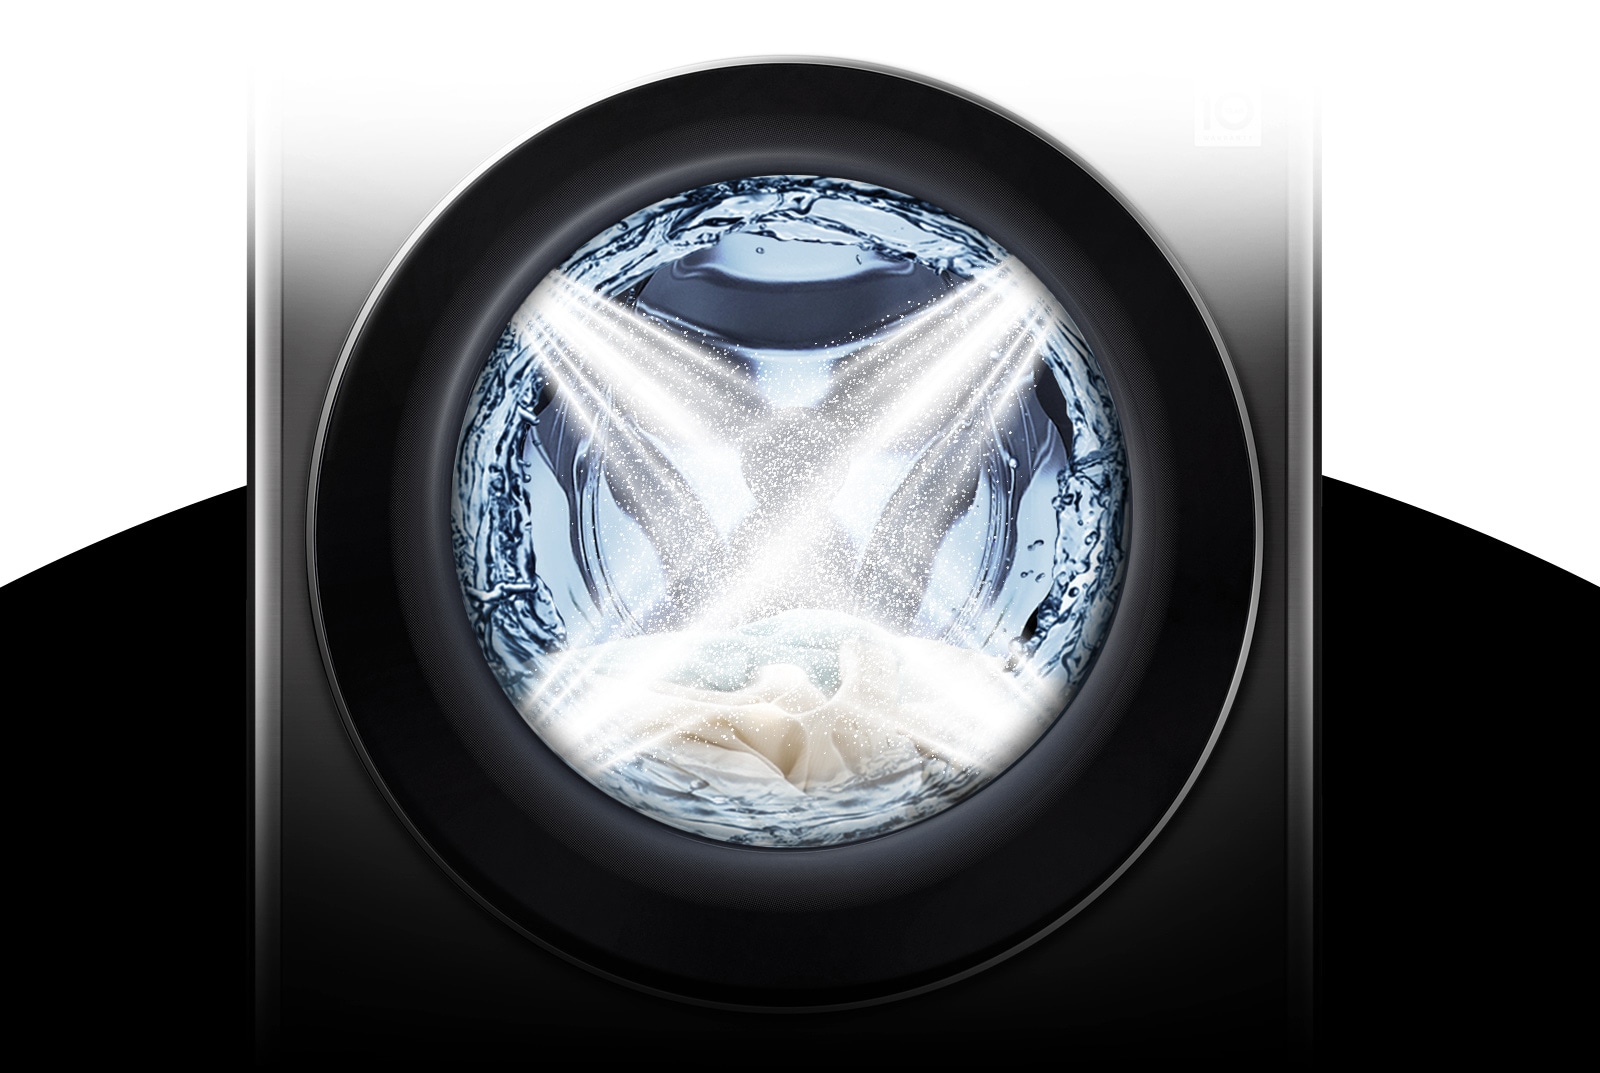 Water flows out of the washing machine in four directions and is doing laundry.